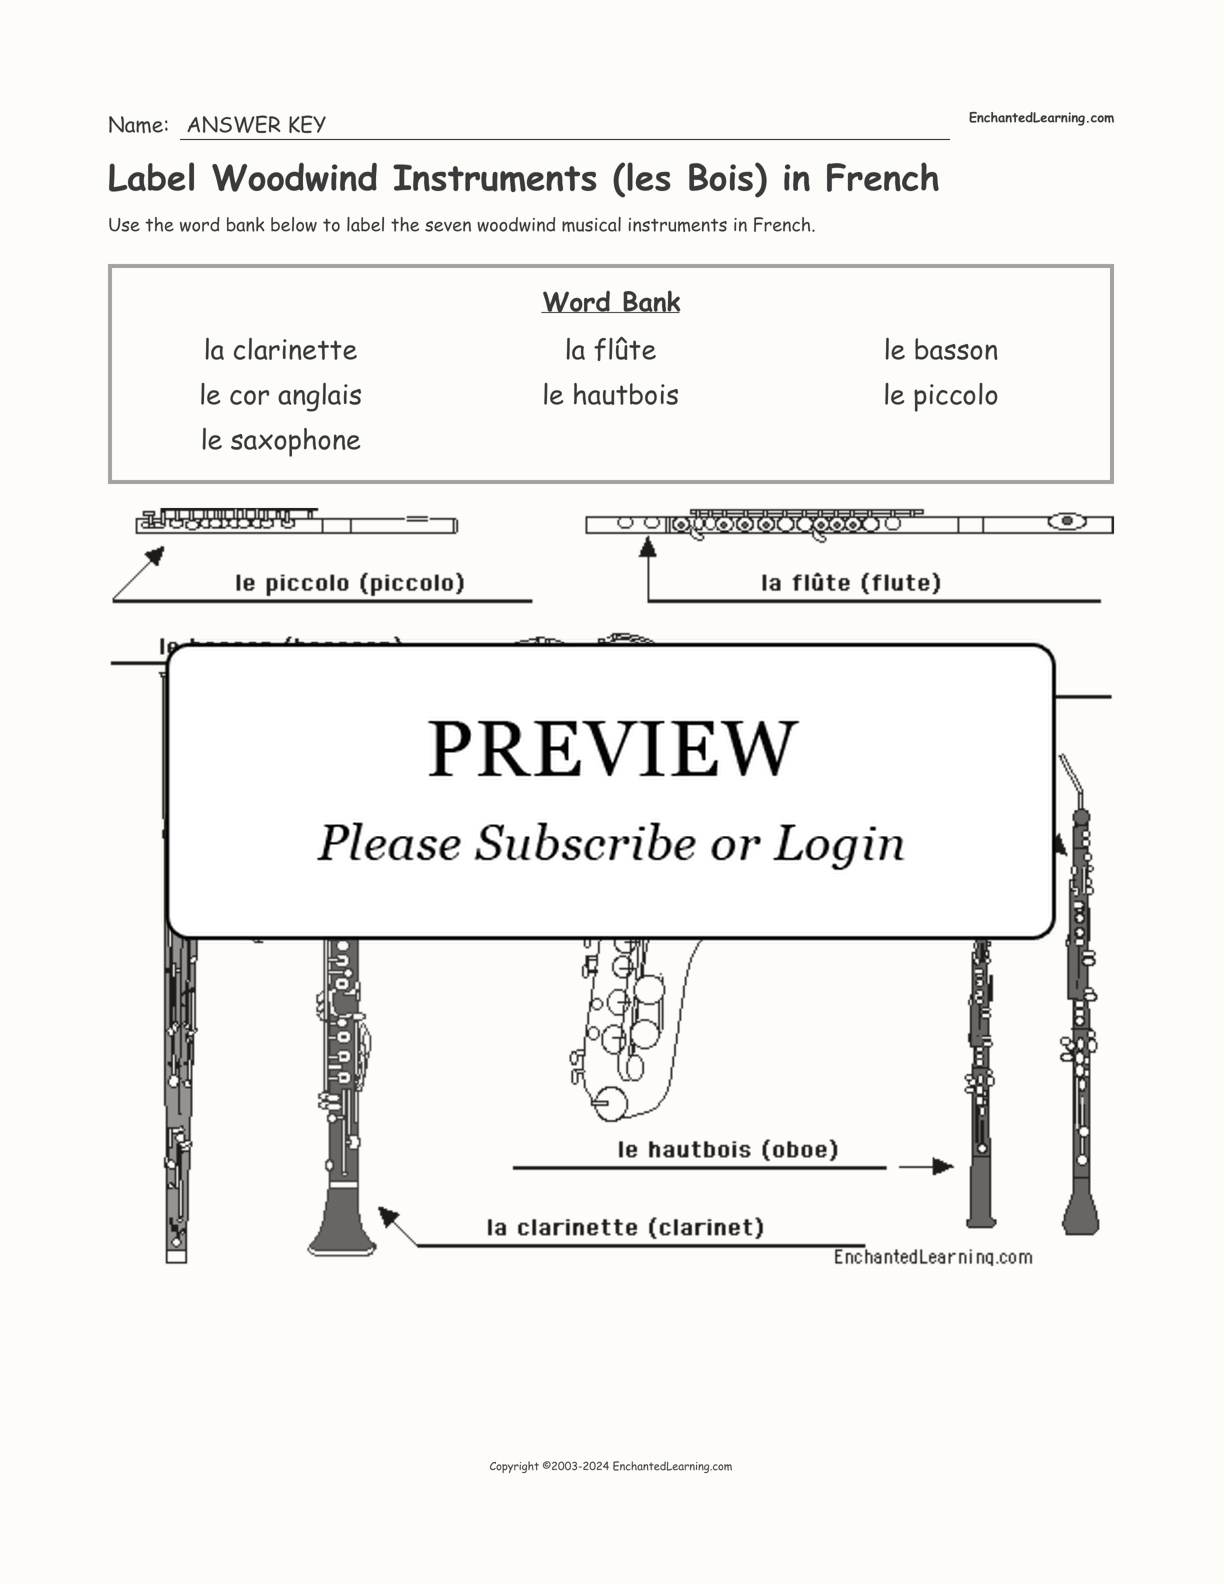 Label Woodwind Instruments (les Bois) in French interactive worksheet page 2